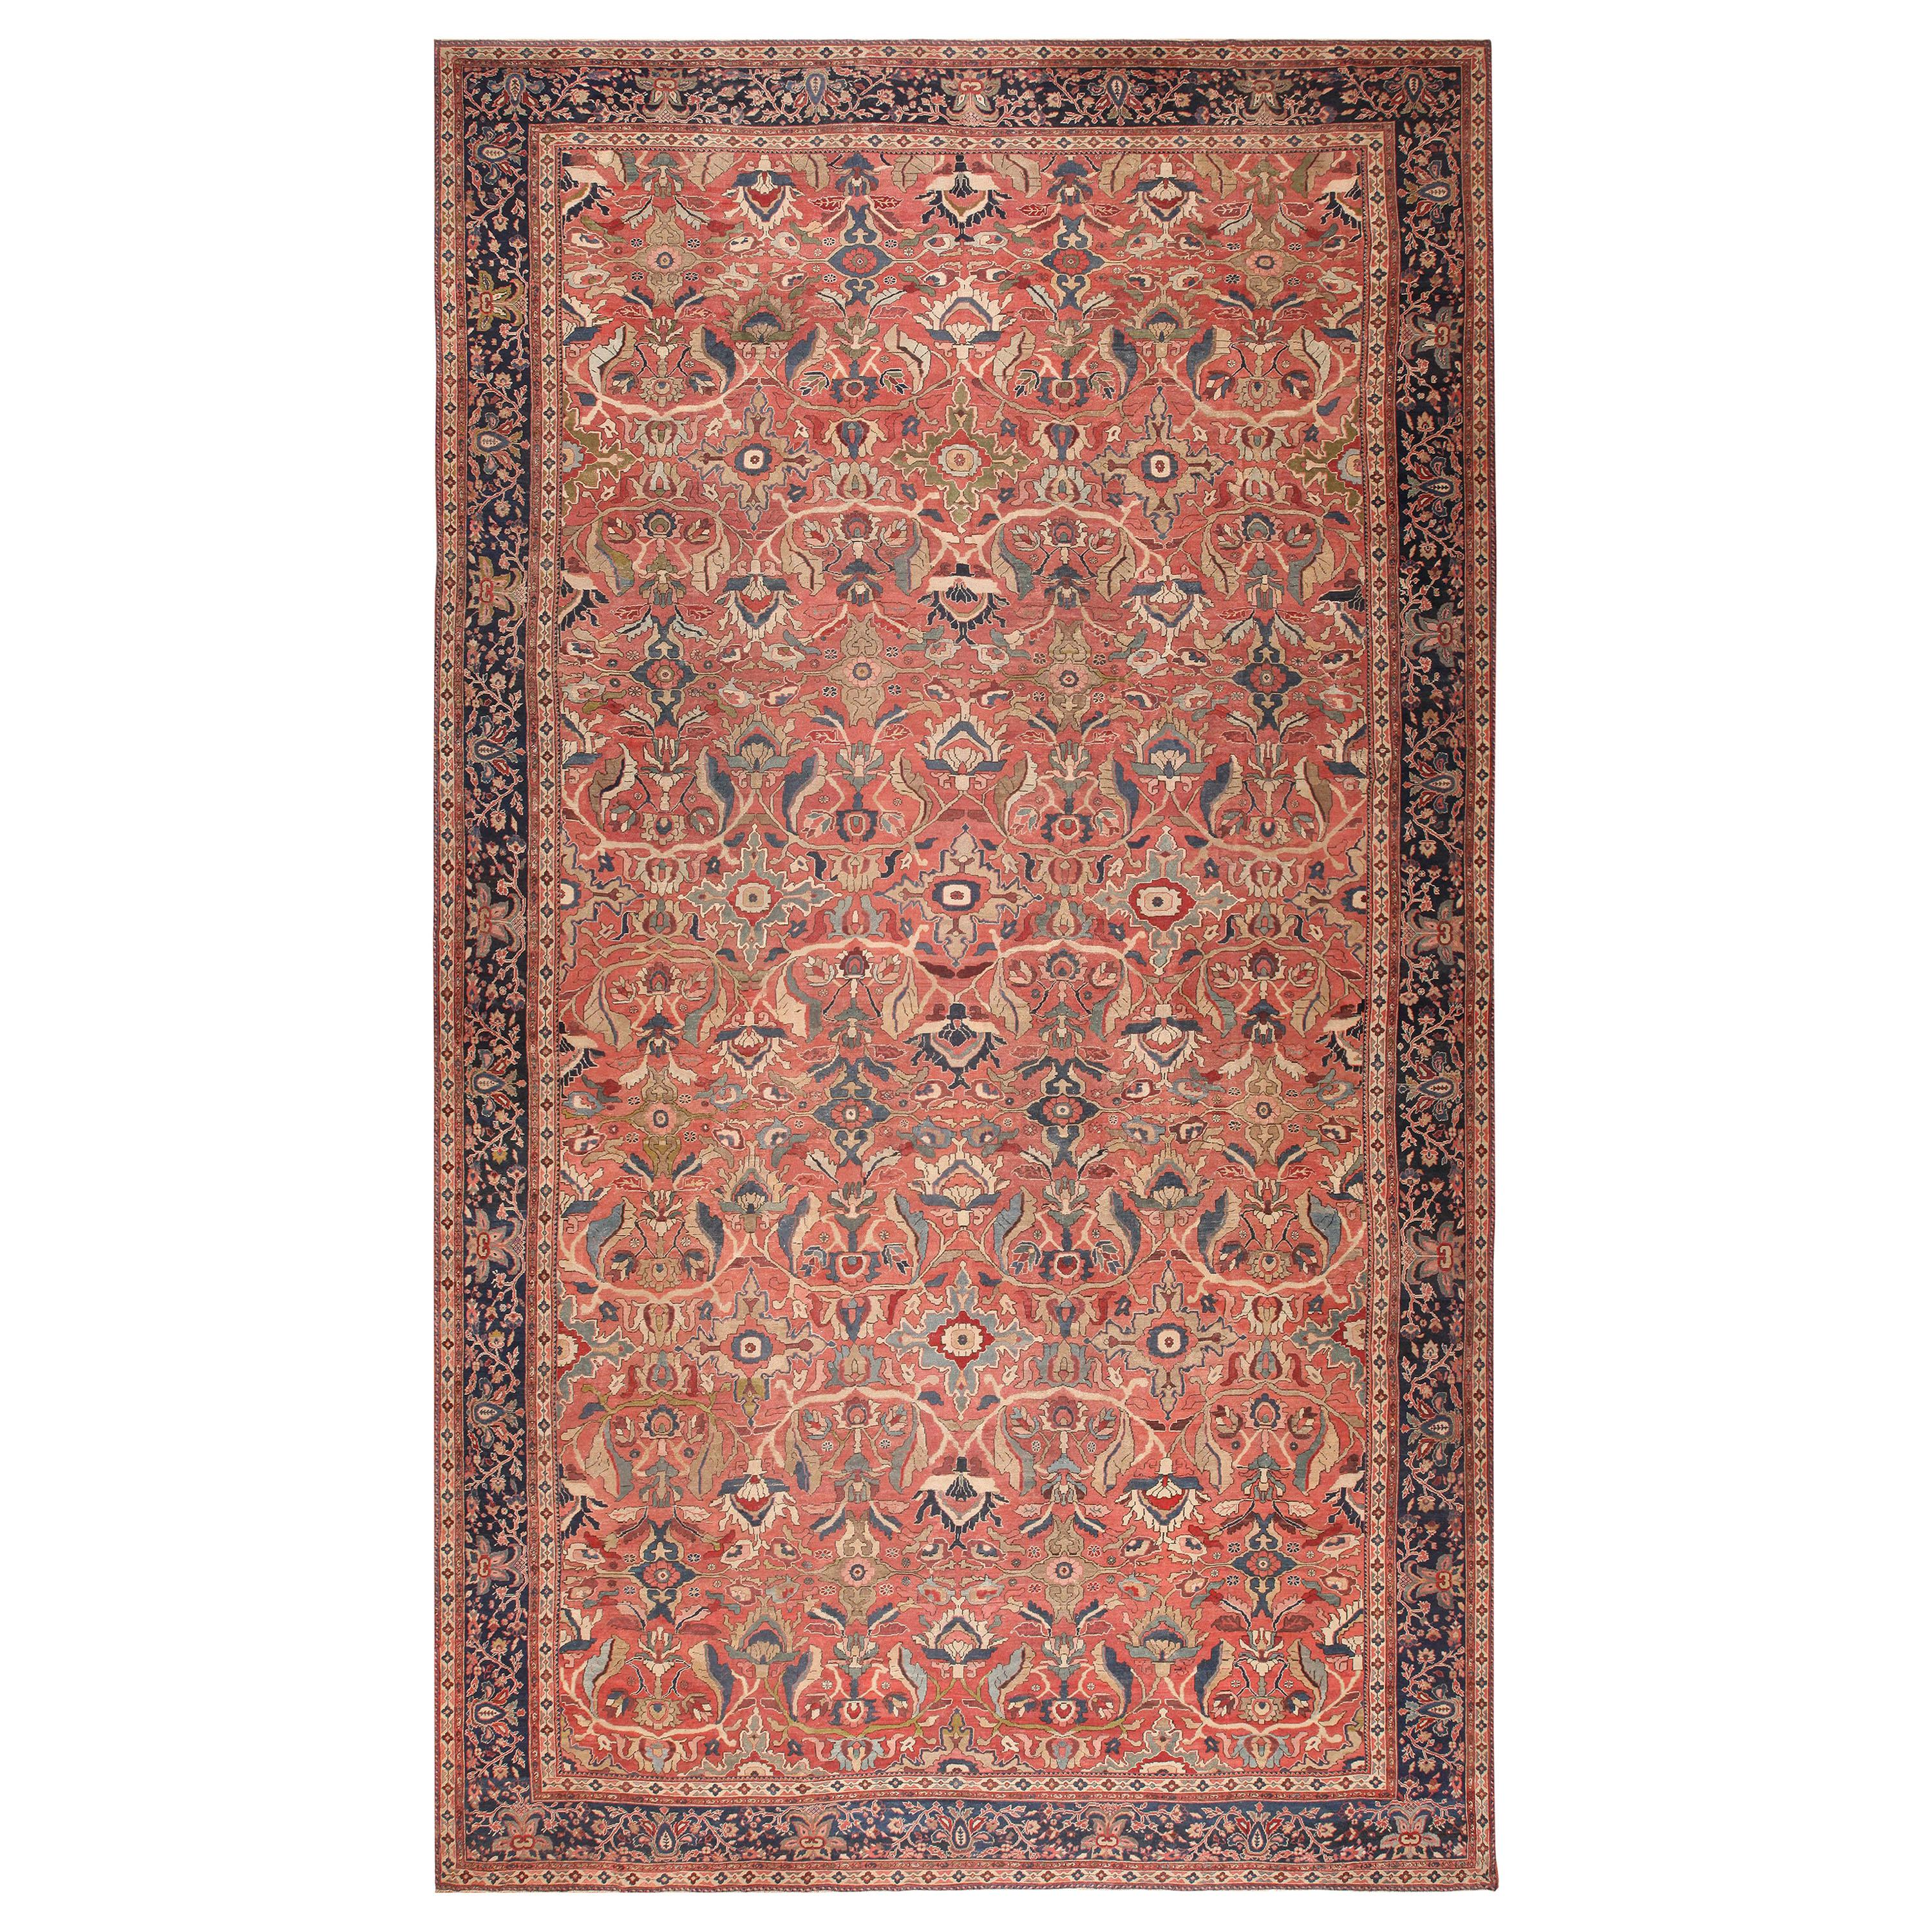 Oversized Antique Persian Sultanabad Rug. Size: 17 ft. 6 in x 31 ft. 2 in